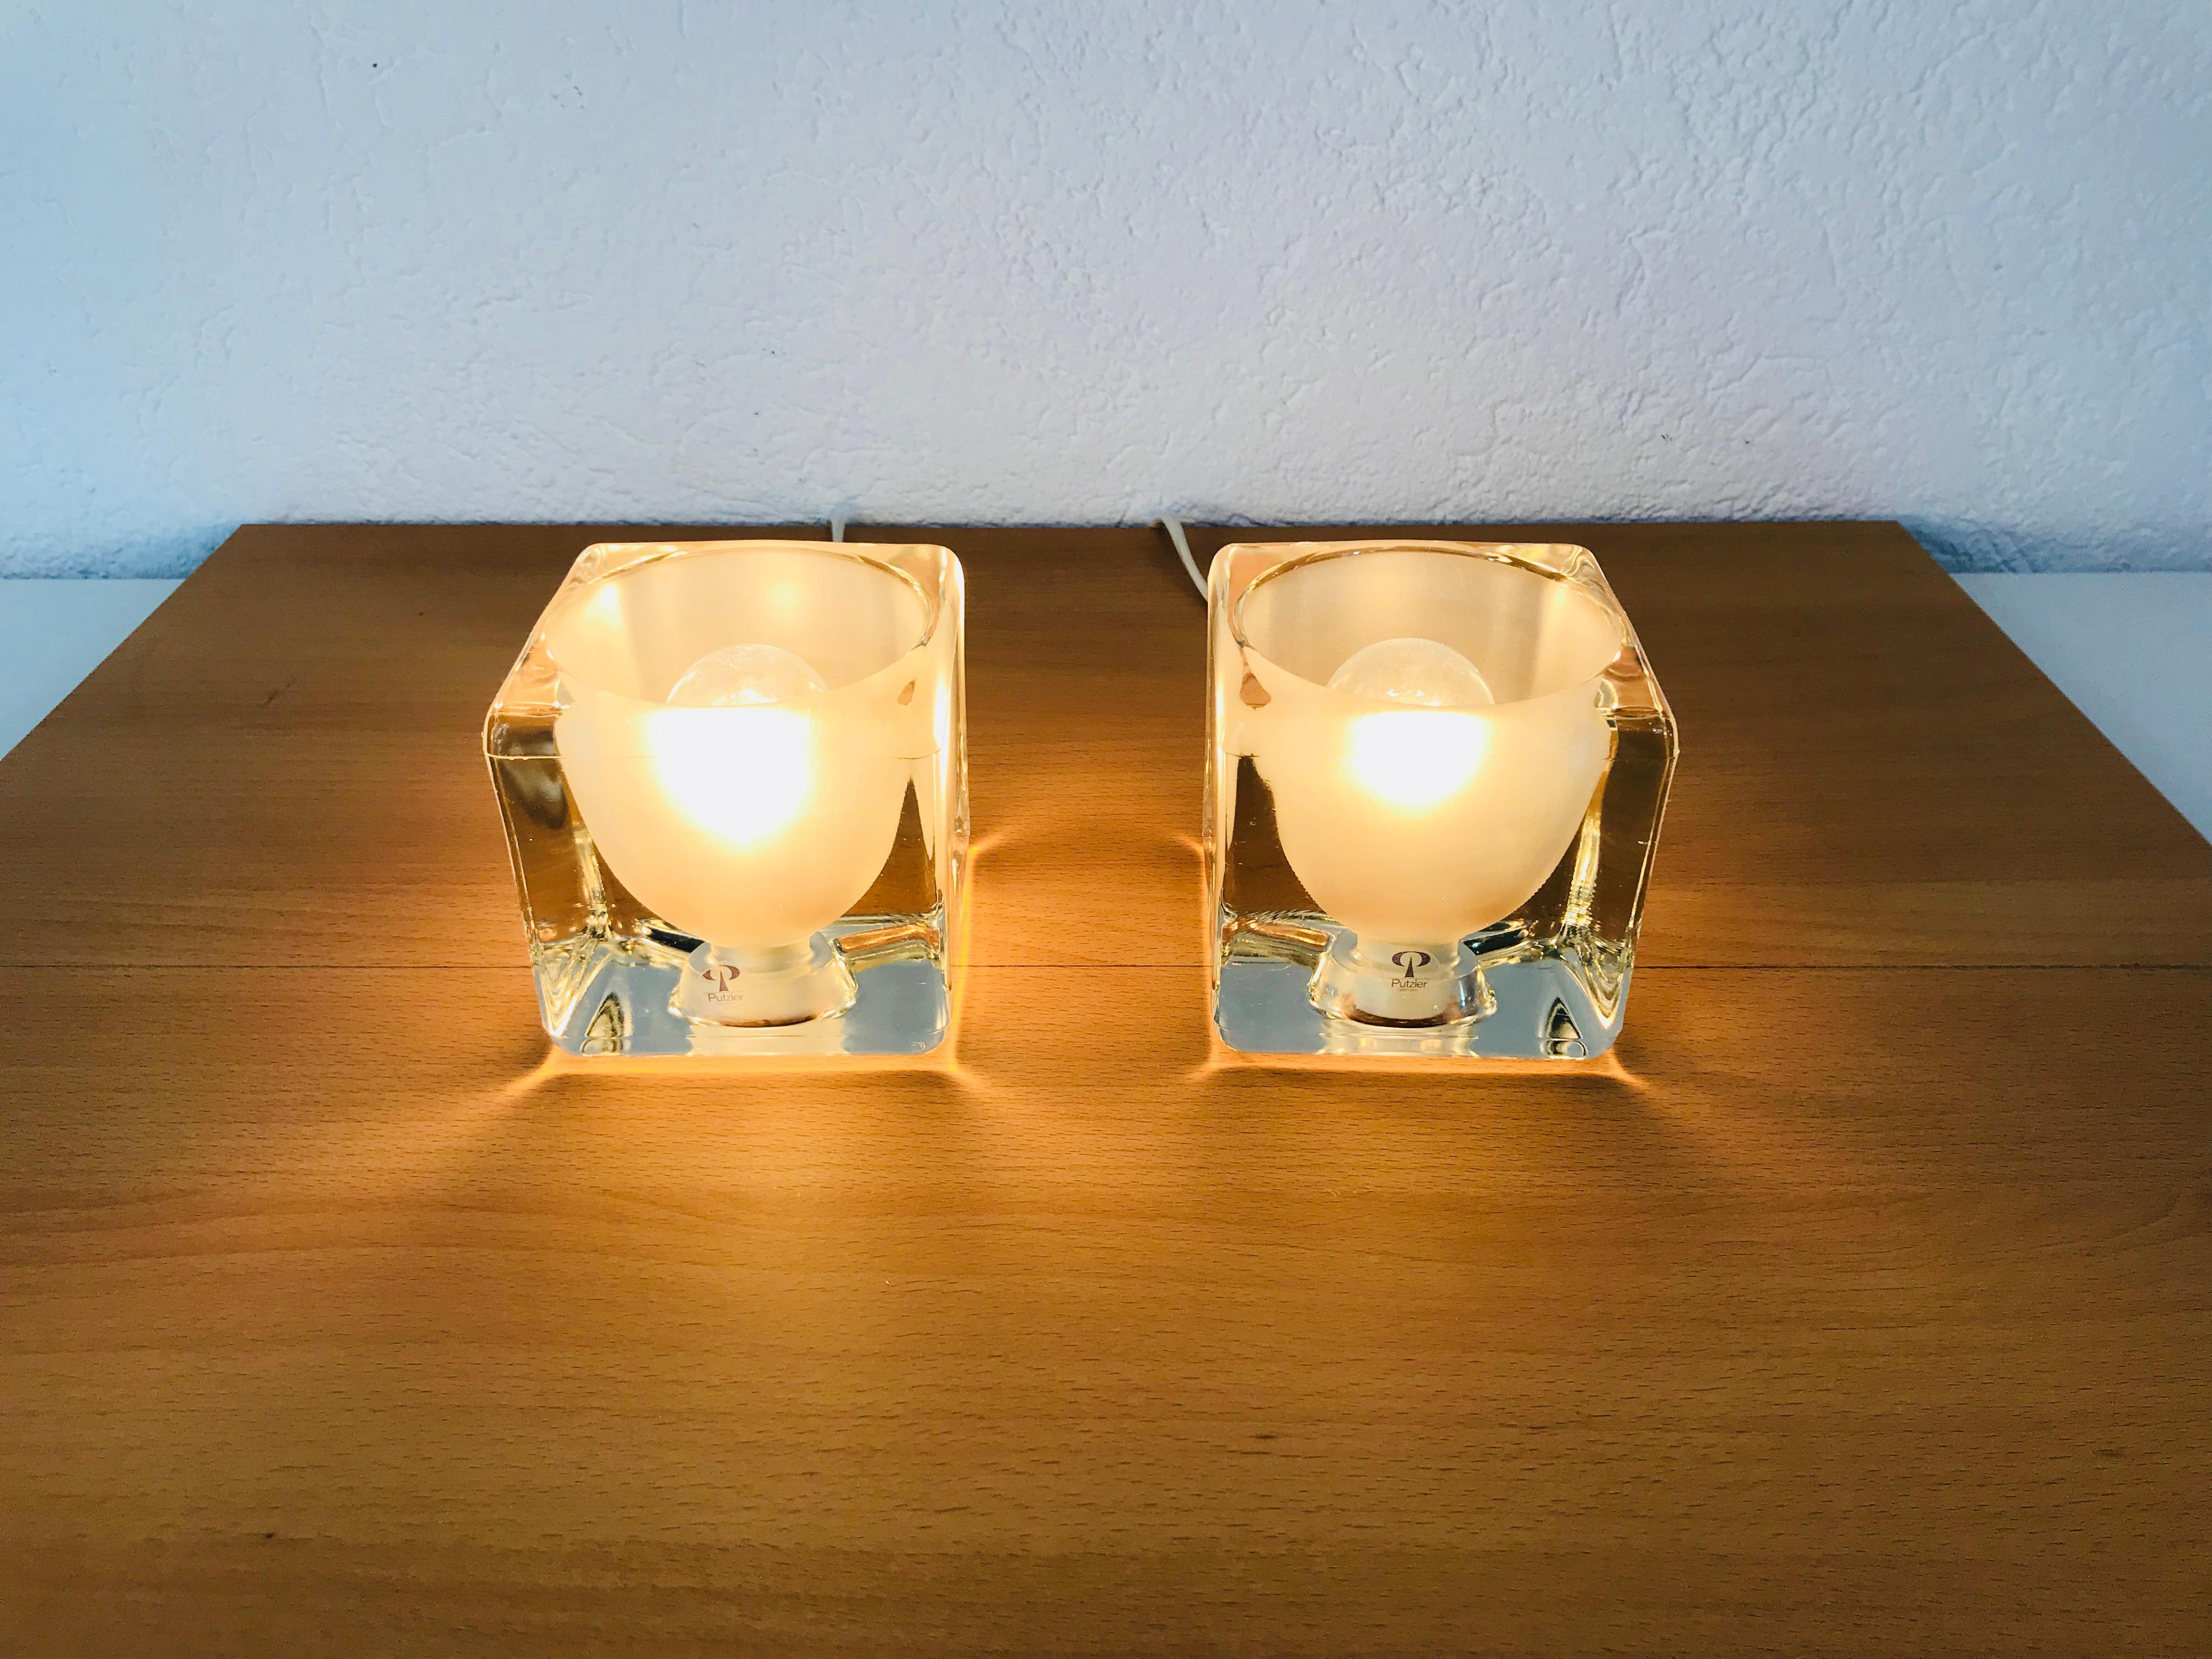 A beautiful pair of table lamps by Peill & Putzler made in Germany in the 1970s. They have a cube shape and are made of transparent ice glass. The original brand label is on both of the lights. They are in very good vintage condition.

The light